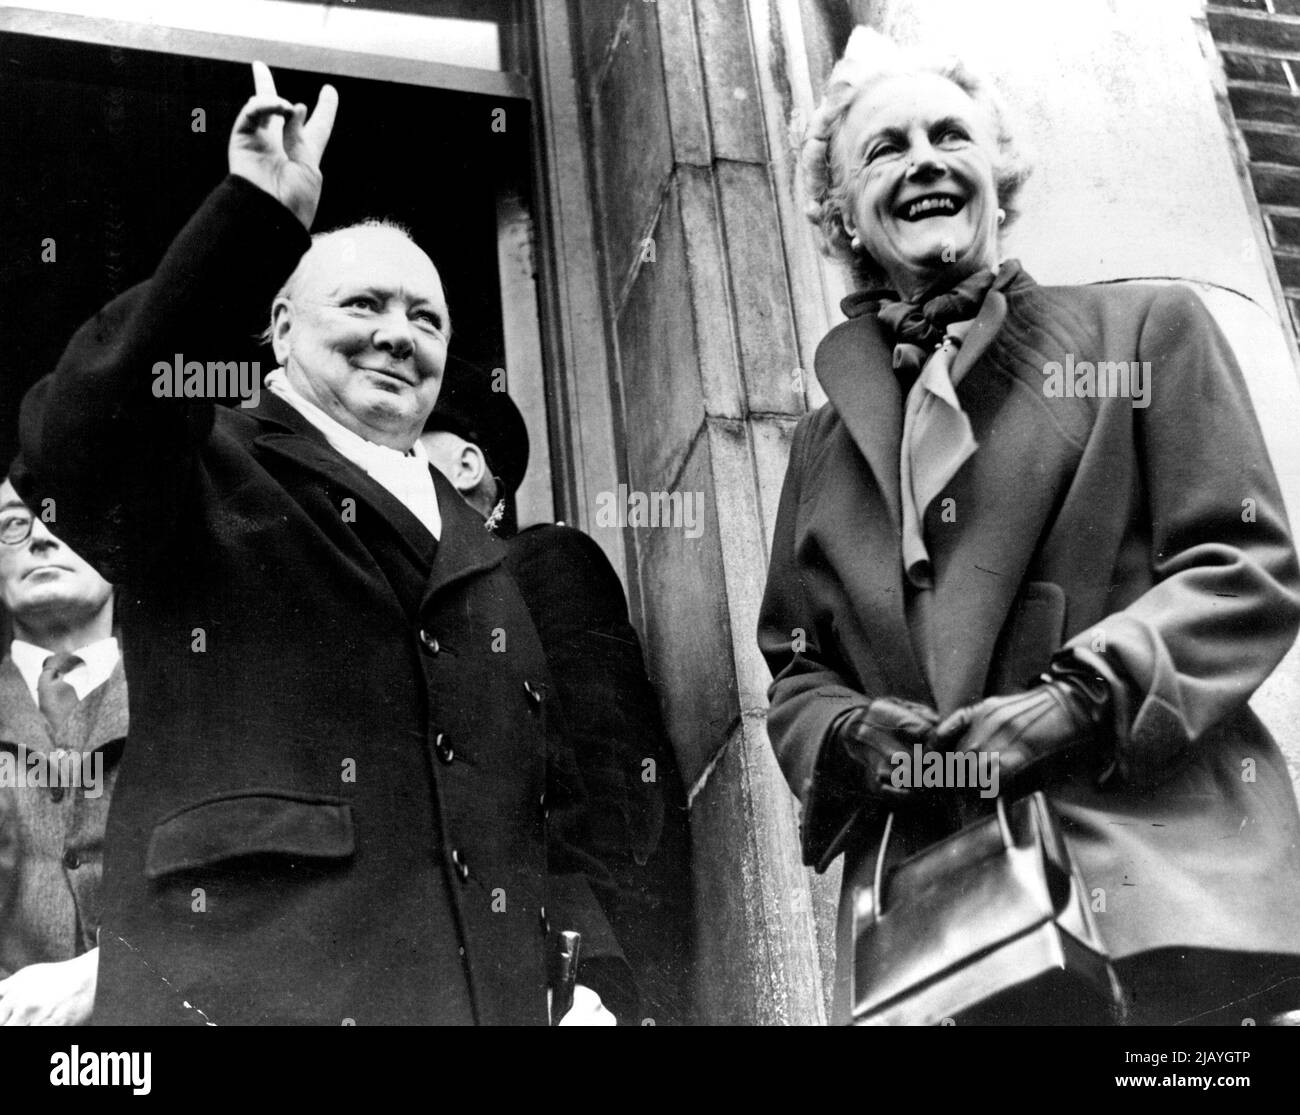 Churchill's Mission - Victory Salute popularized by Churchill during the war was the doughty Englishman's reaction to his latest triumph at the polls. His wife shares his newest moment of glory. December 23, 1951. (Photo by International News Photos). Stock Photo